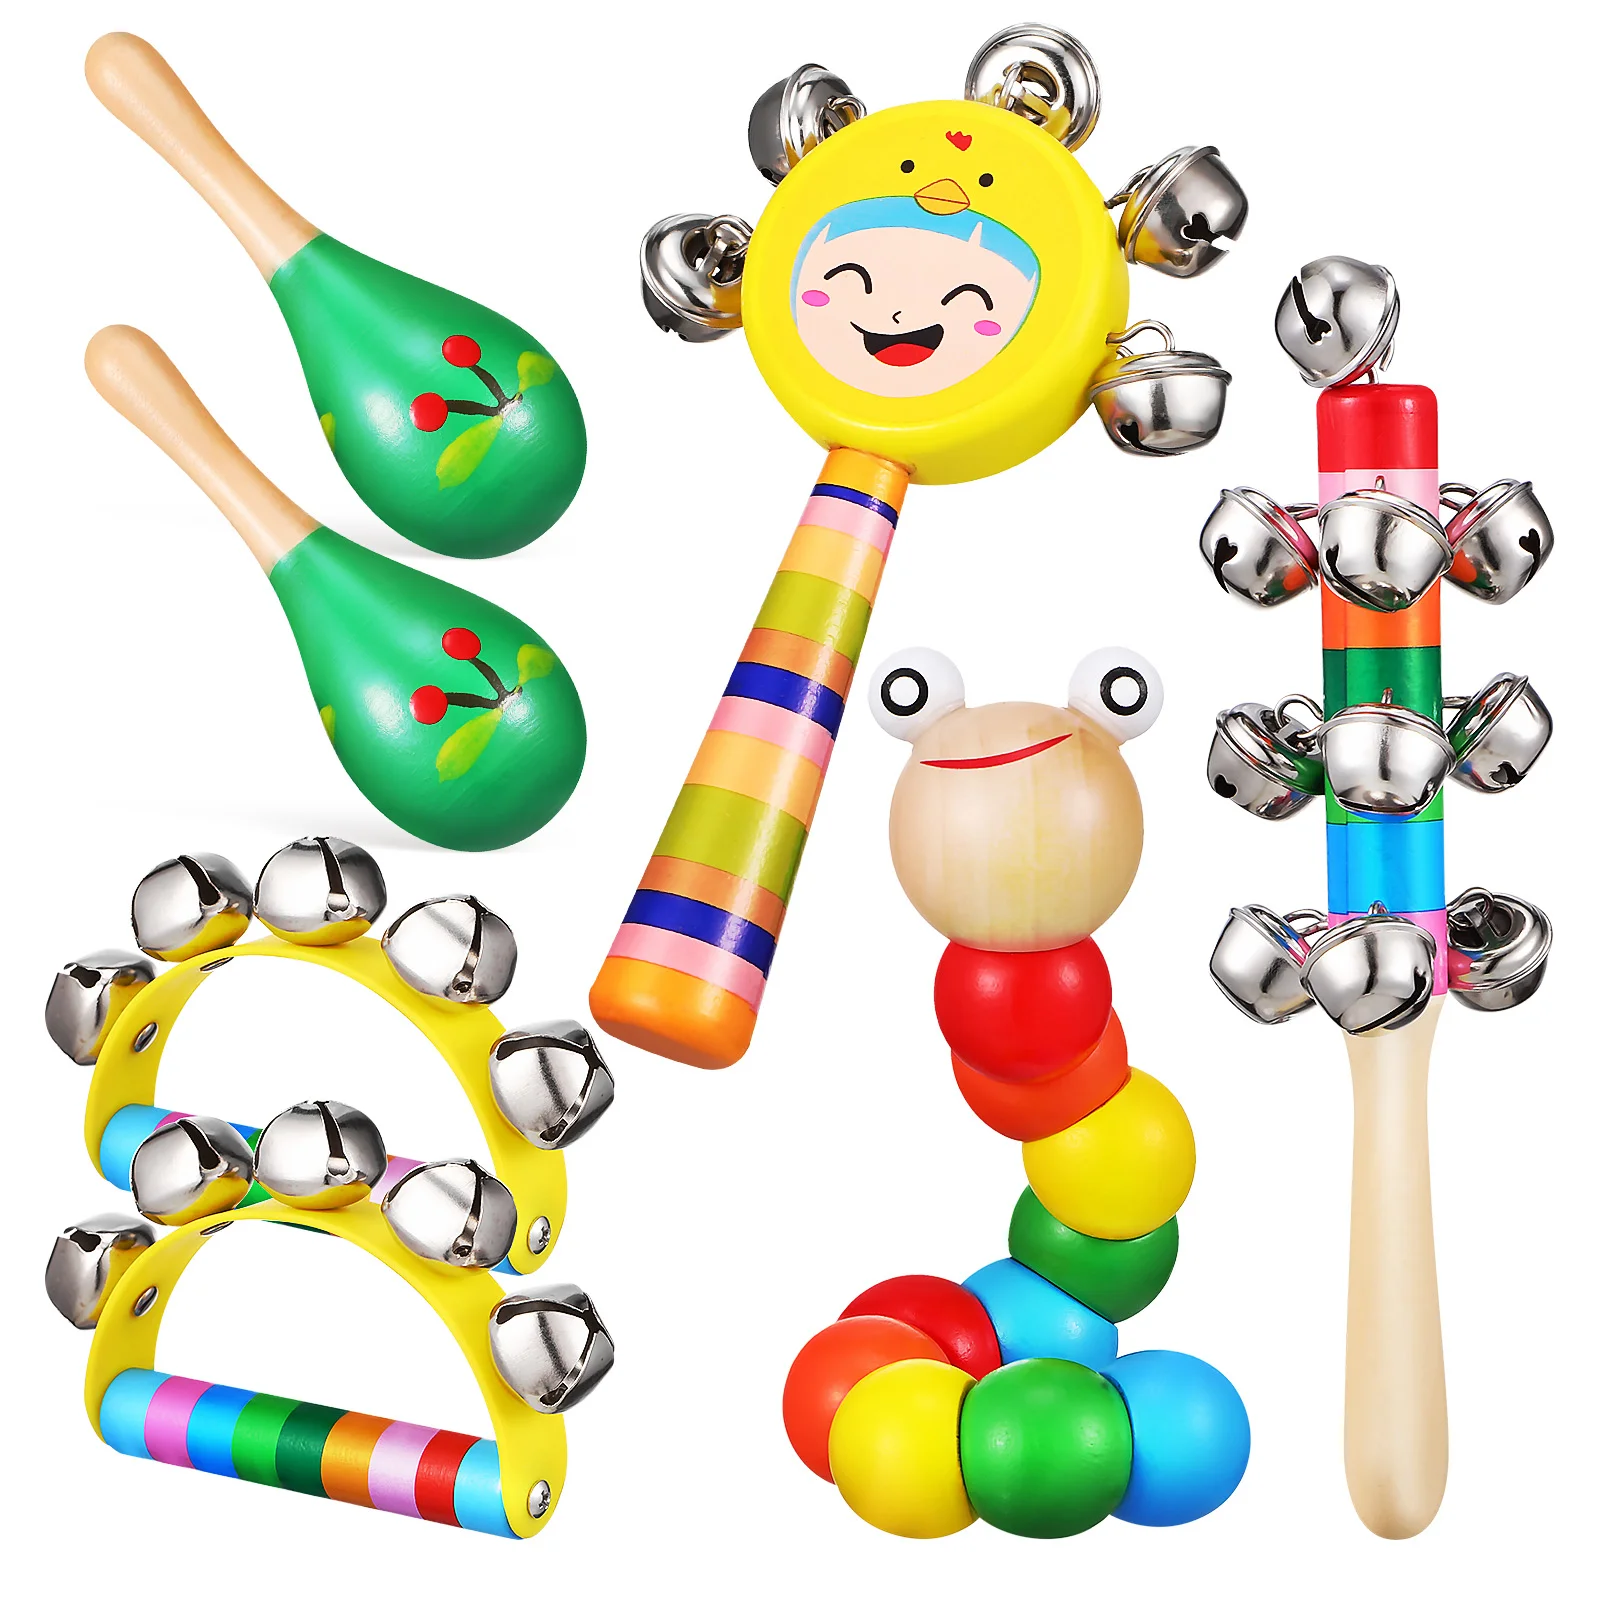 

Hand Toy Children’s Toys Wooden Maracas Small Music Rattles Mini Educational Instruments Shaker Bells Baby Percussion